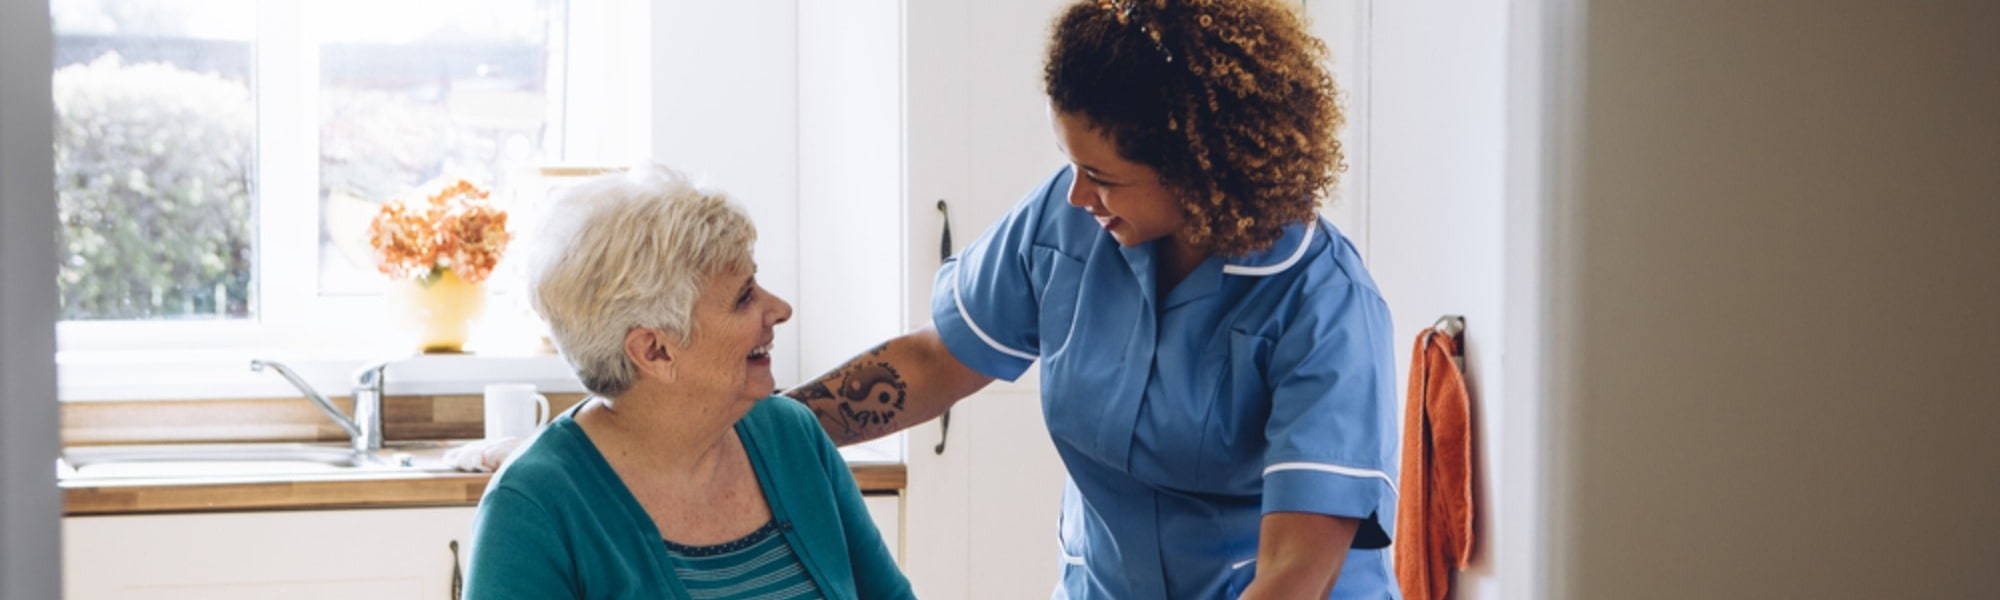 home care nurse and elderly patient smiling